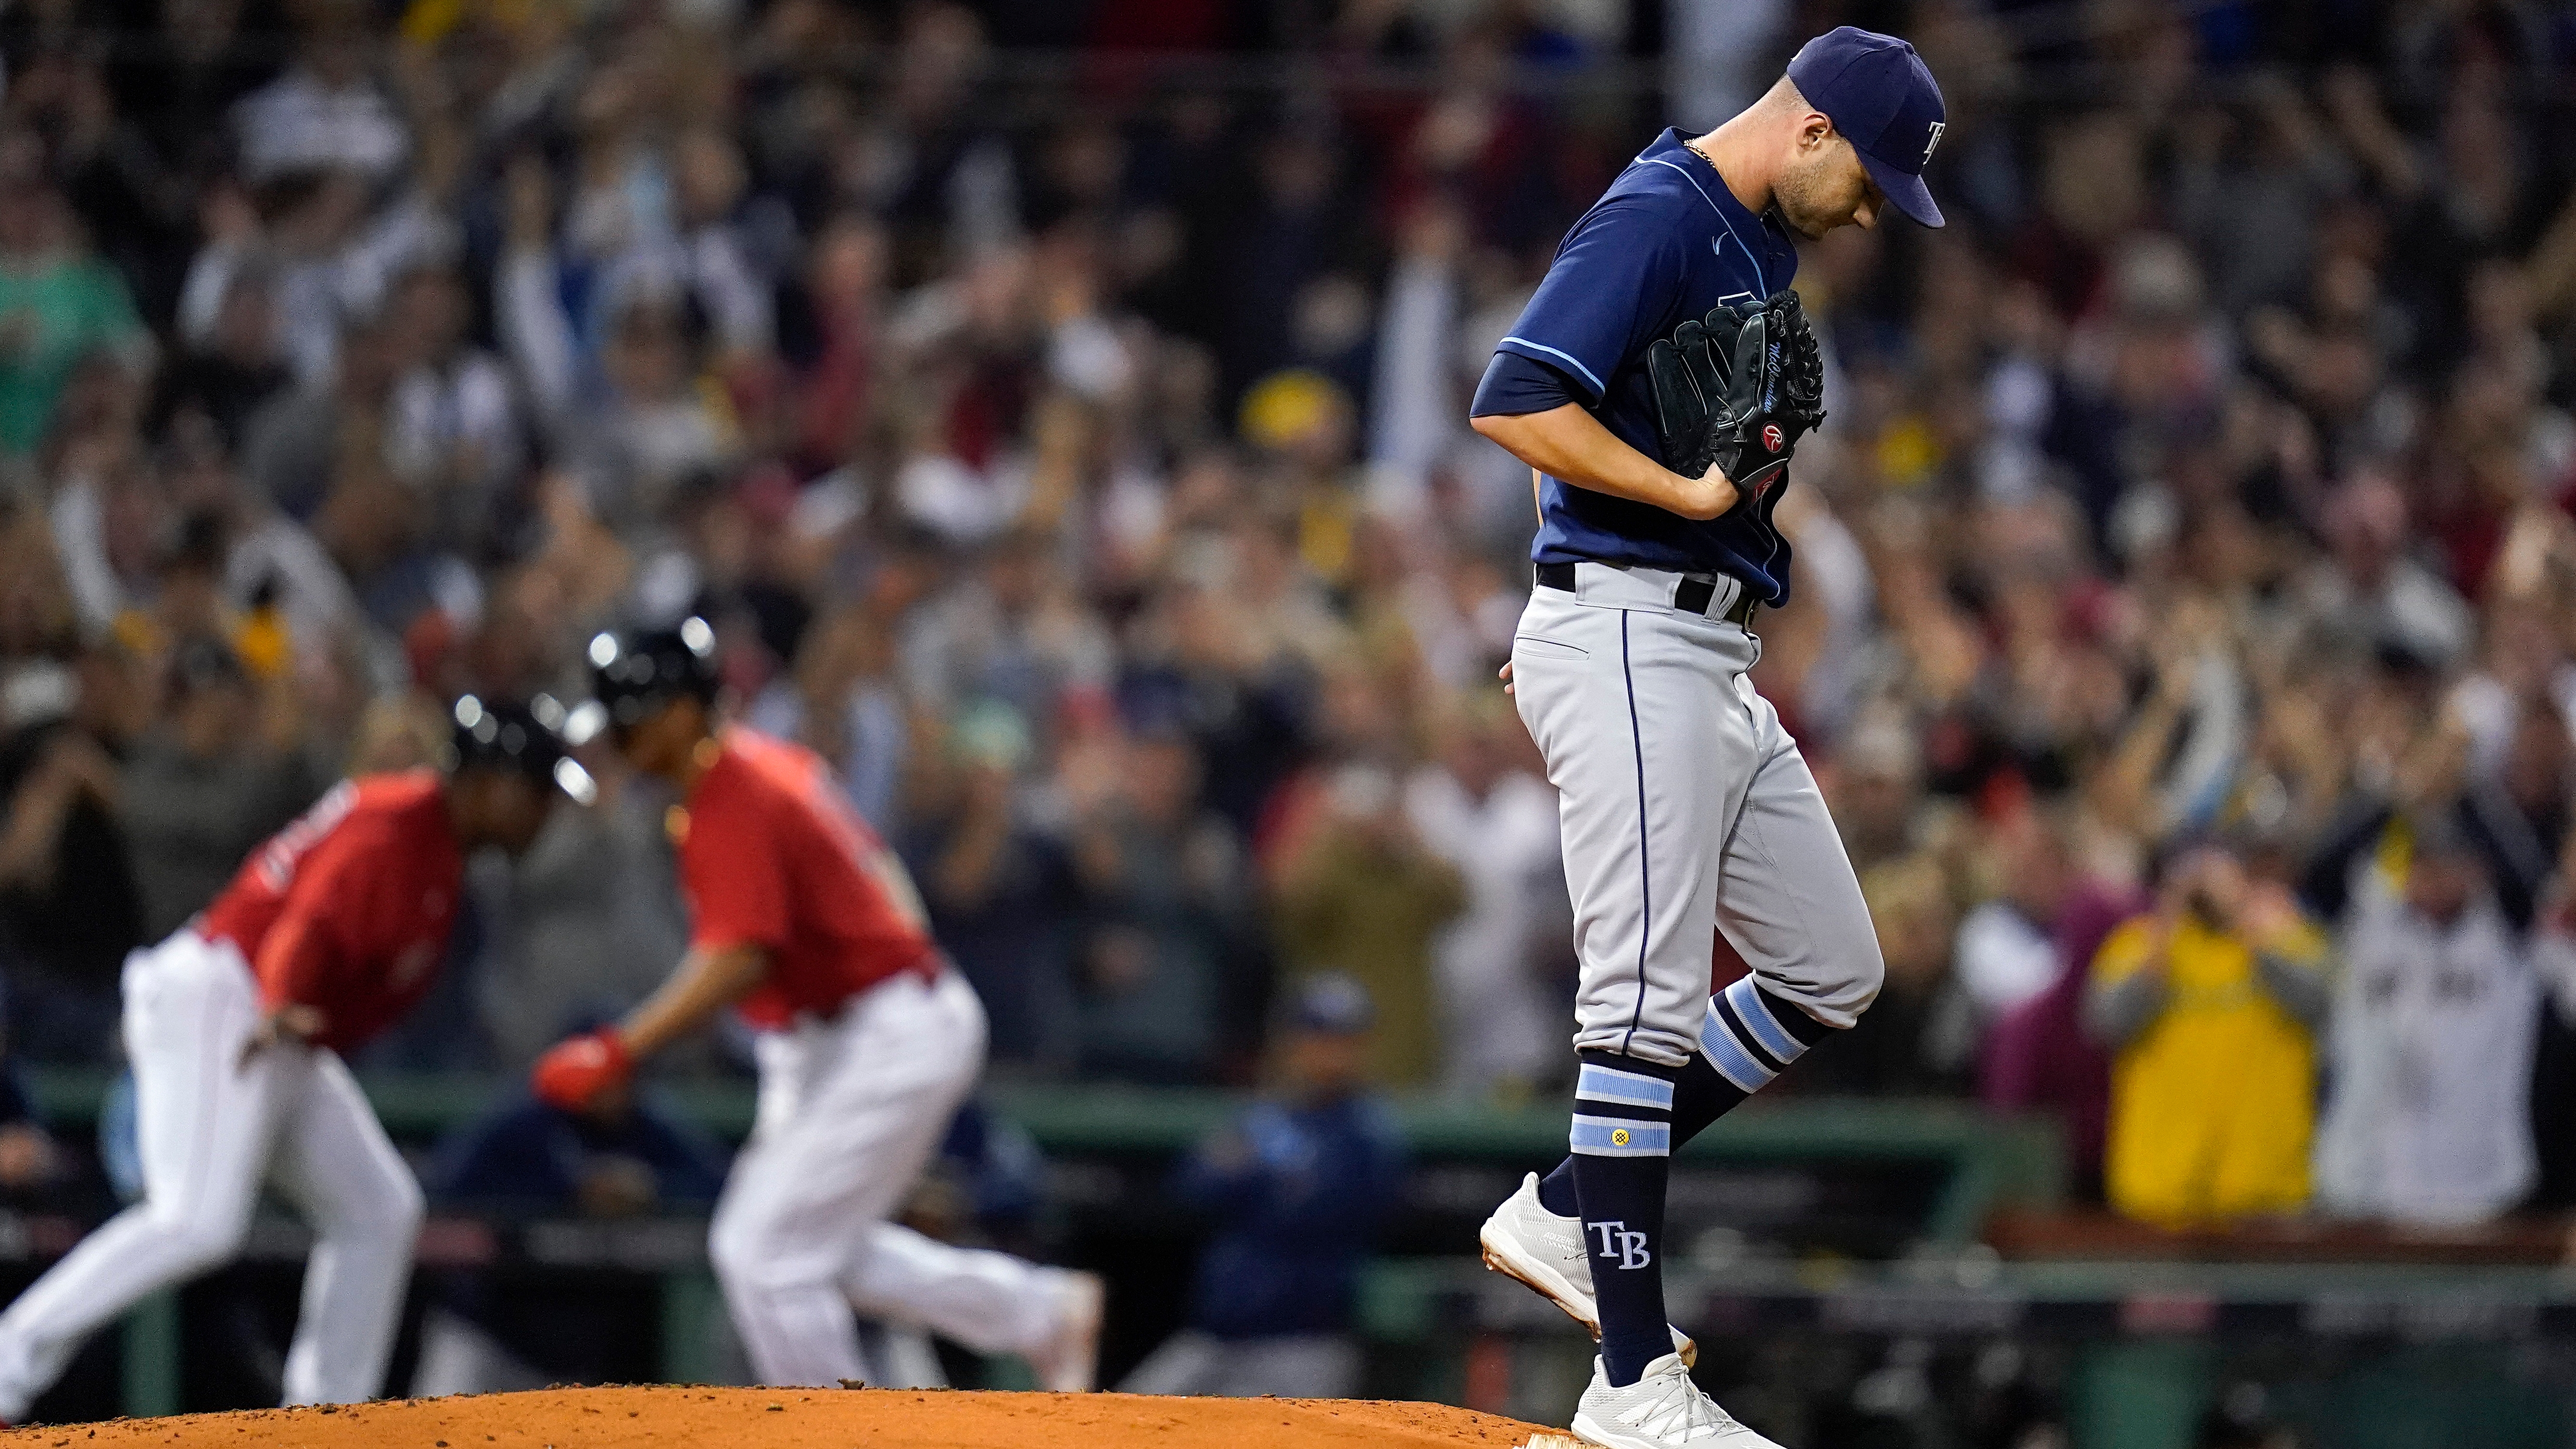 Red Sox upset Rays in ALDS in HUGE upset to start out Postseason